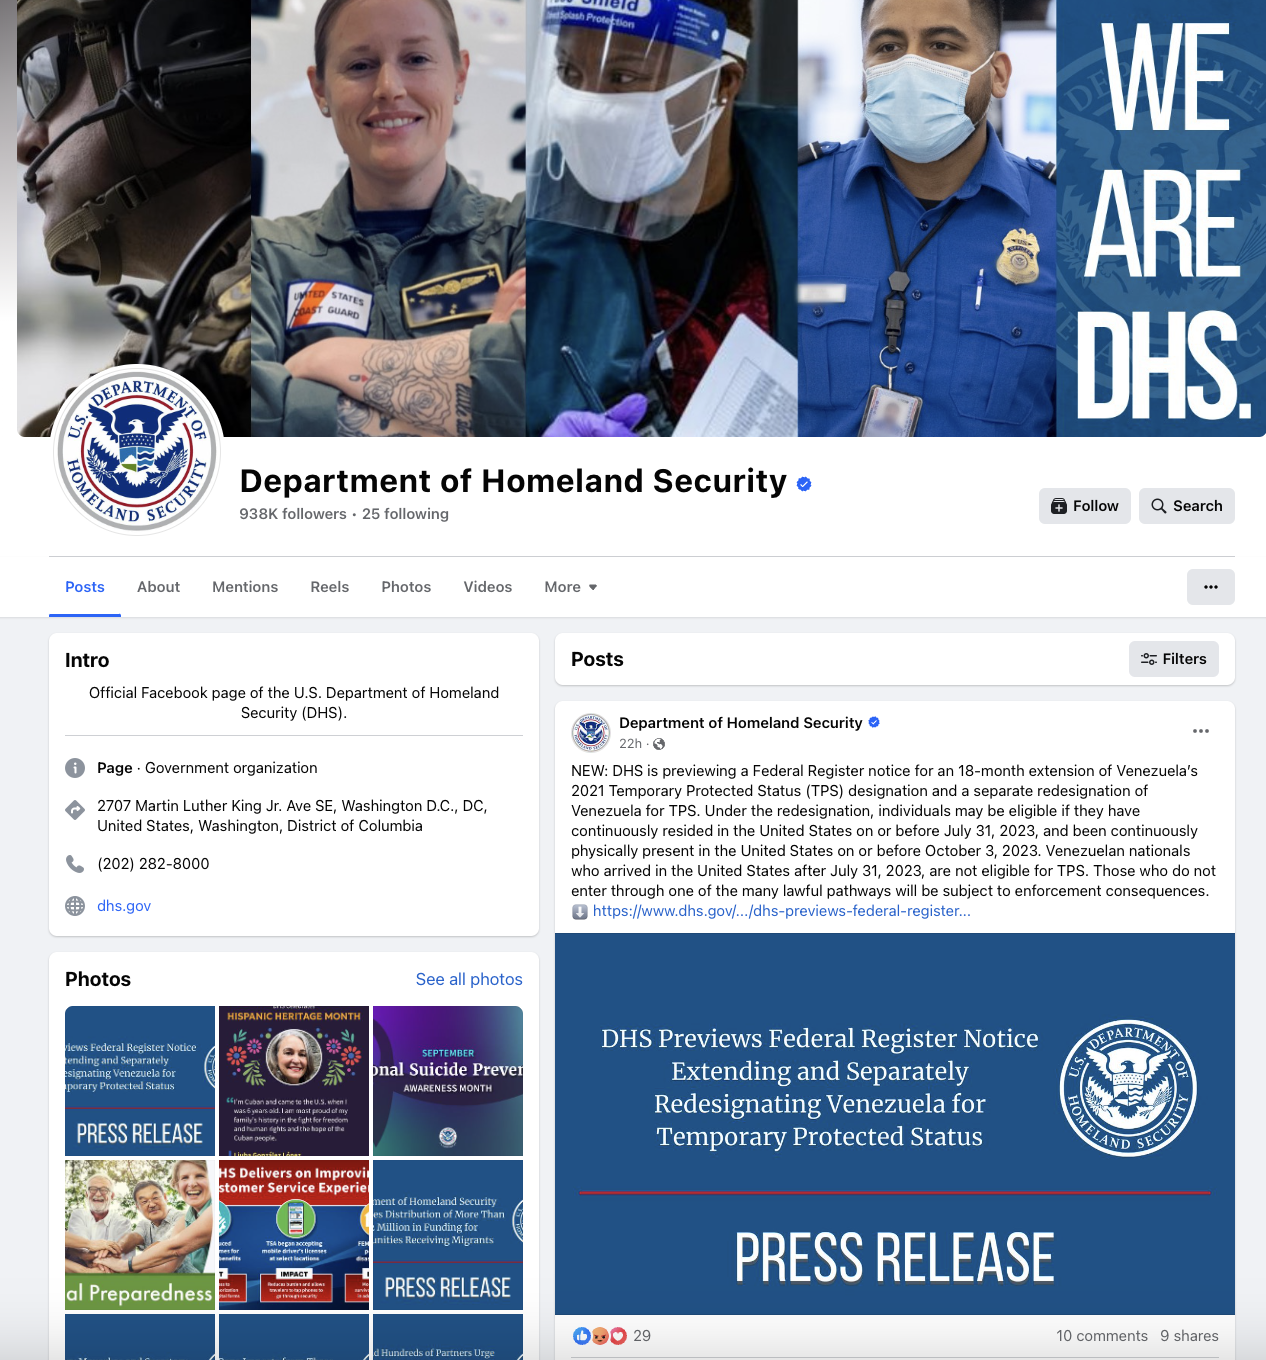 Screenshot of the Department of Homeland Security Facebook Page